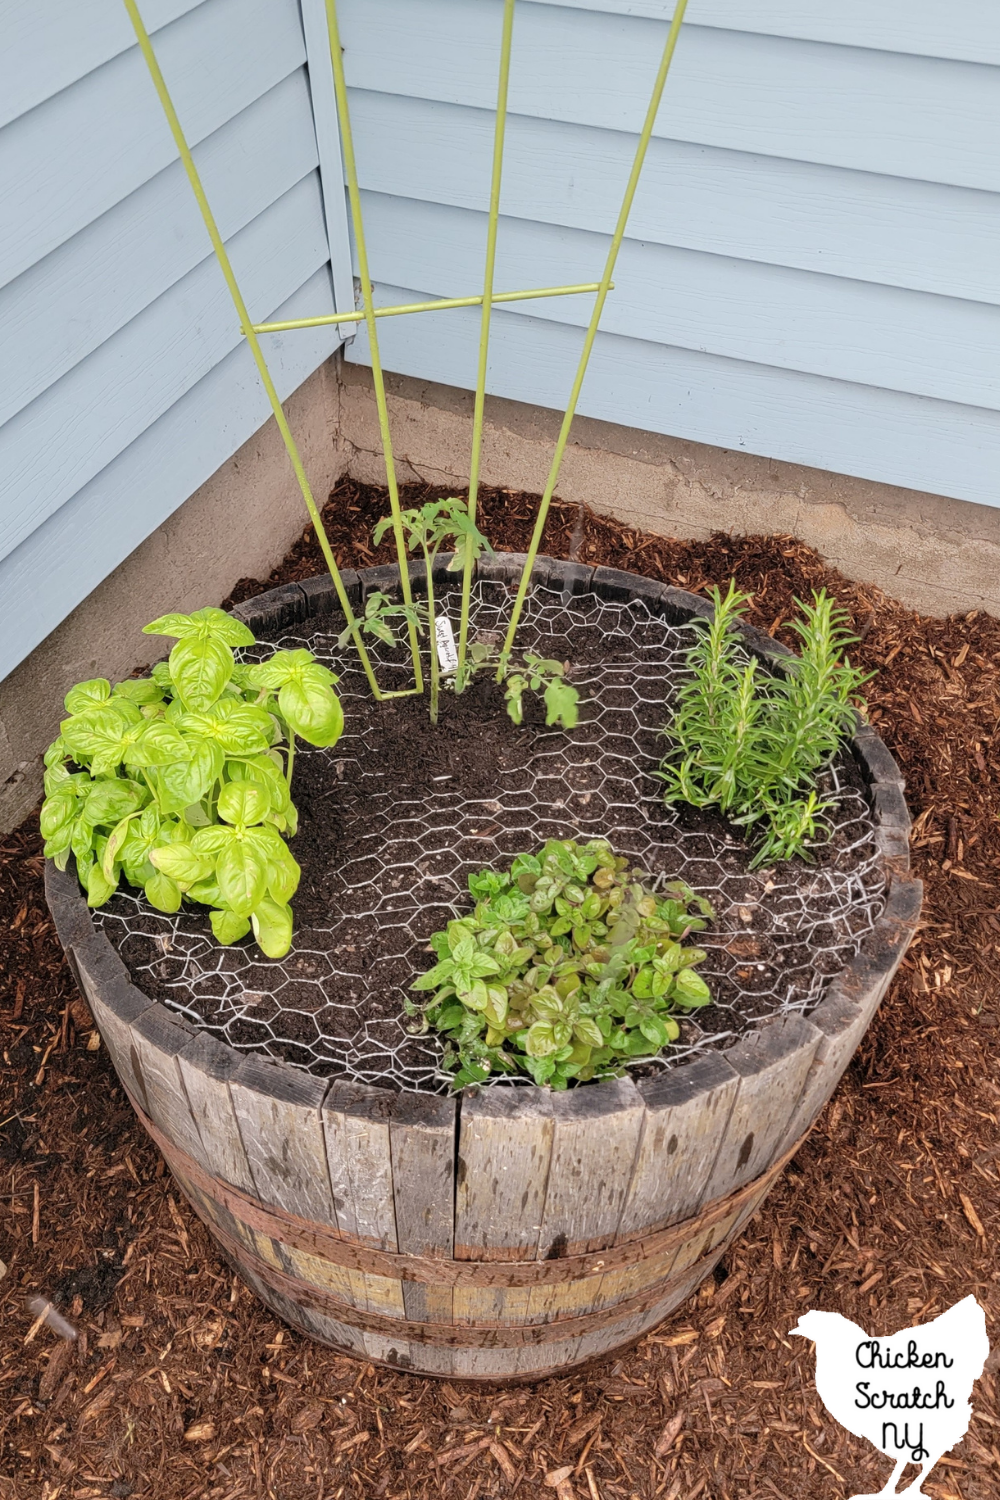 Image of Pot of basil and tomatoes in the same pot